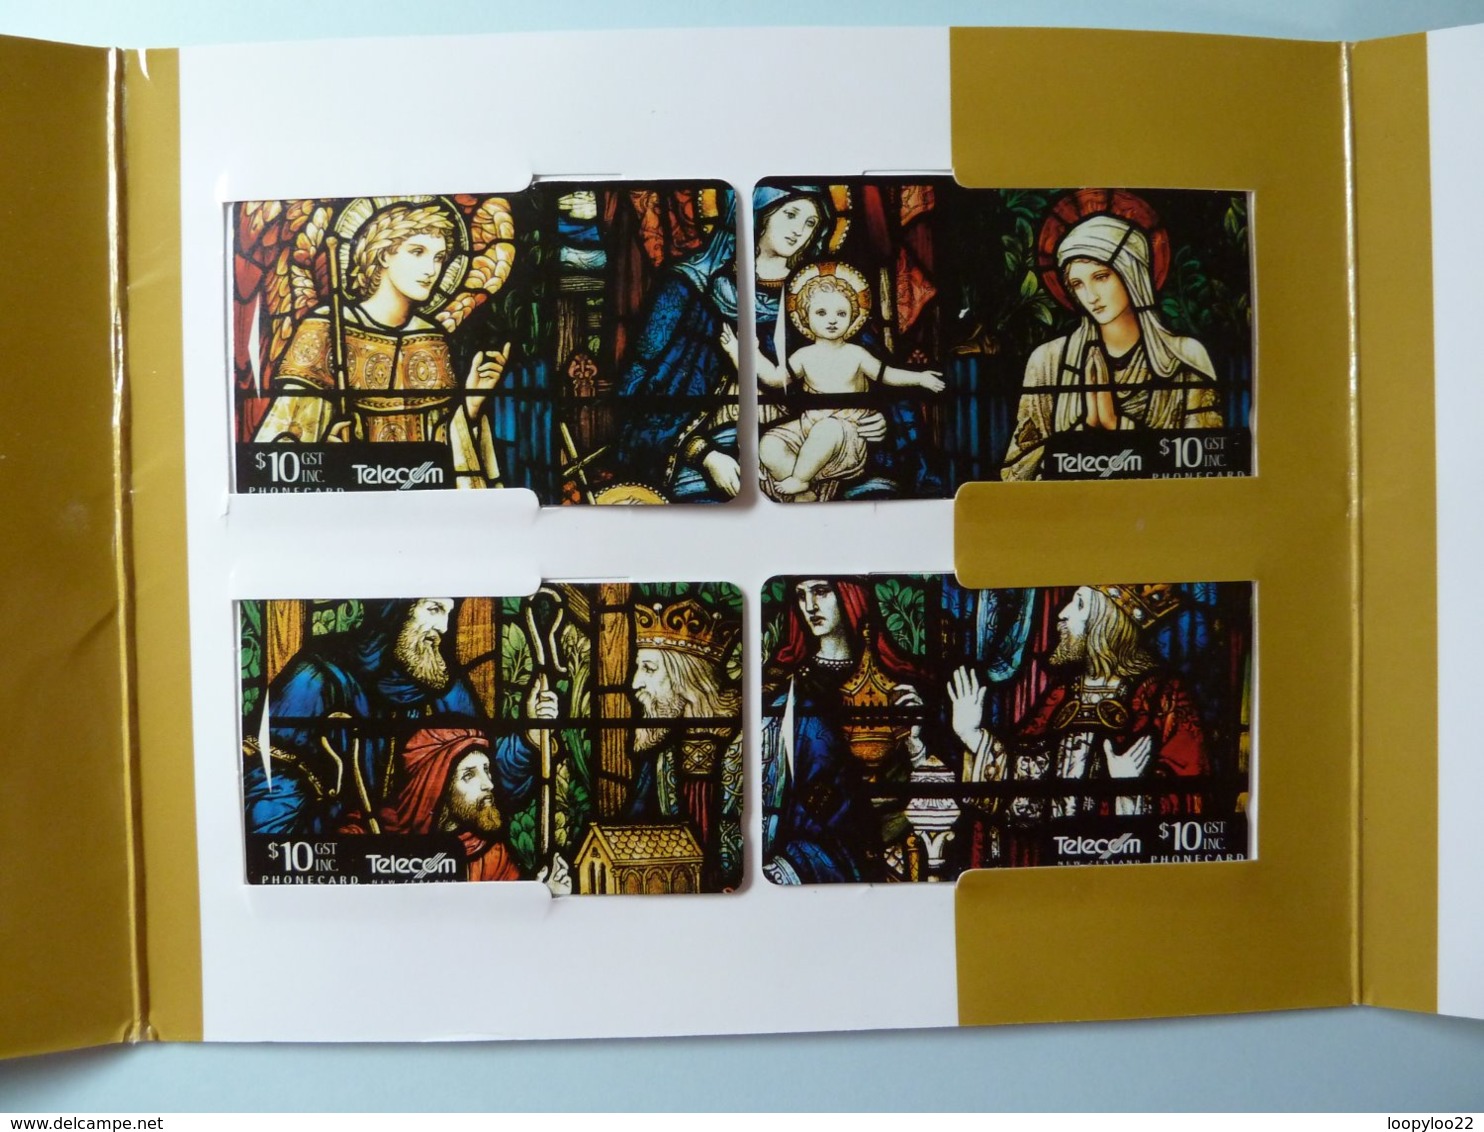 New Zealand - GPT - Stained Glass Windows - Phonecard & Stamp - Limited Edition 3000ex & Certificate - Mint In Folder - New Zealand